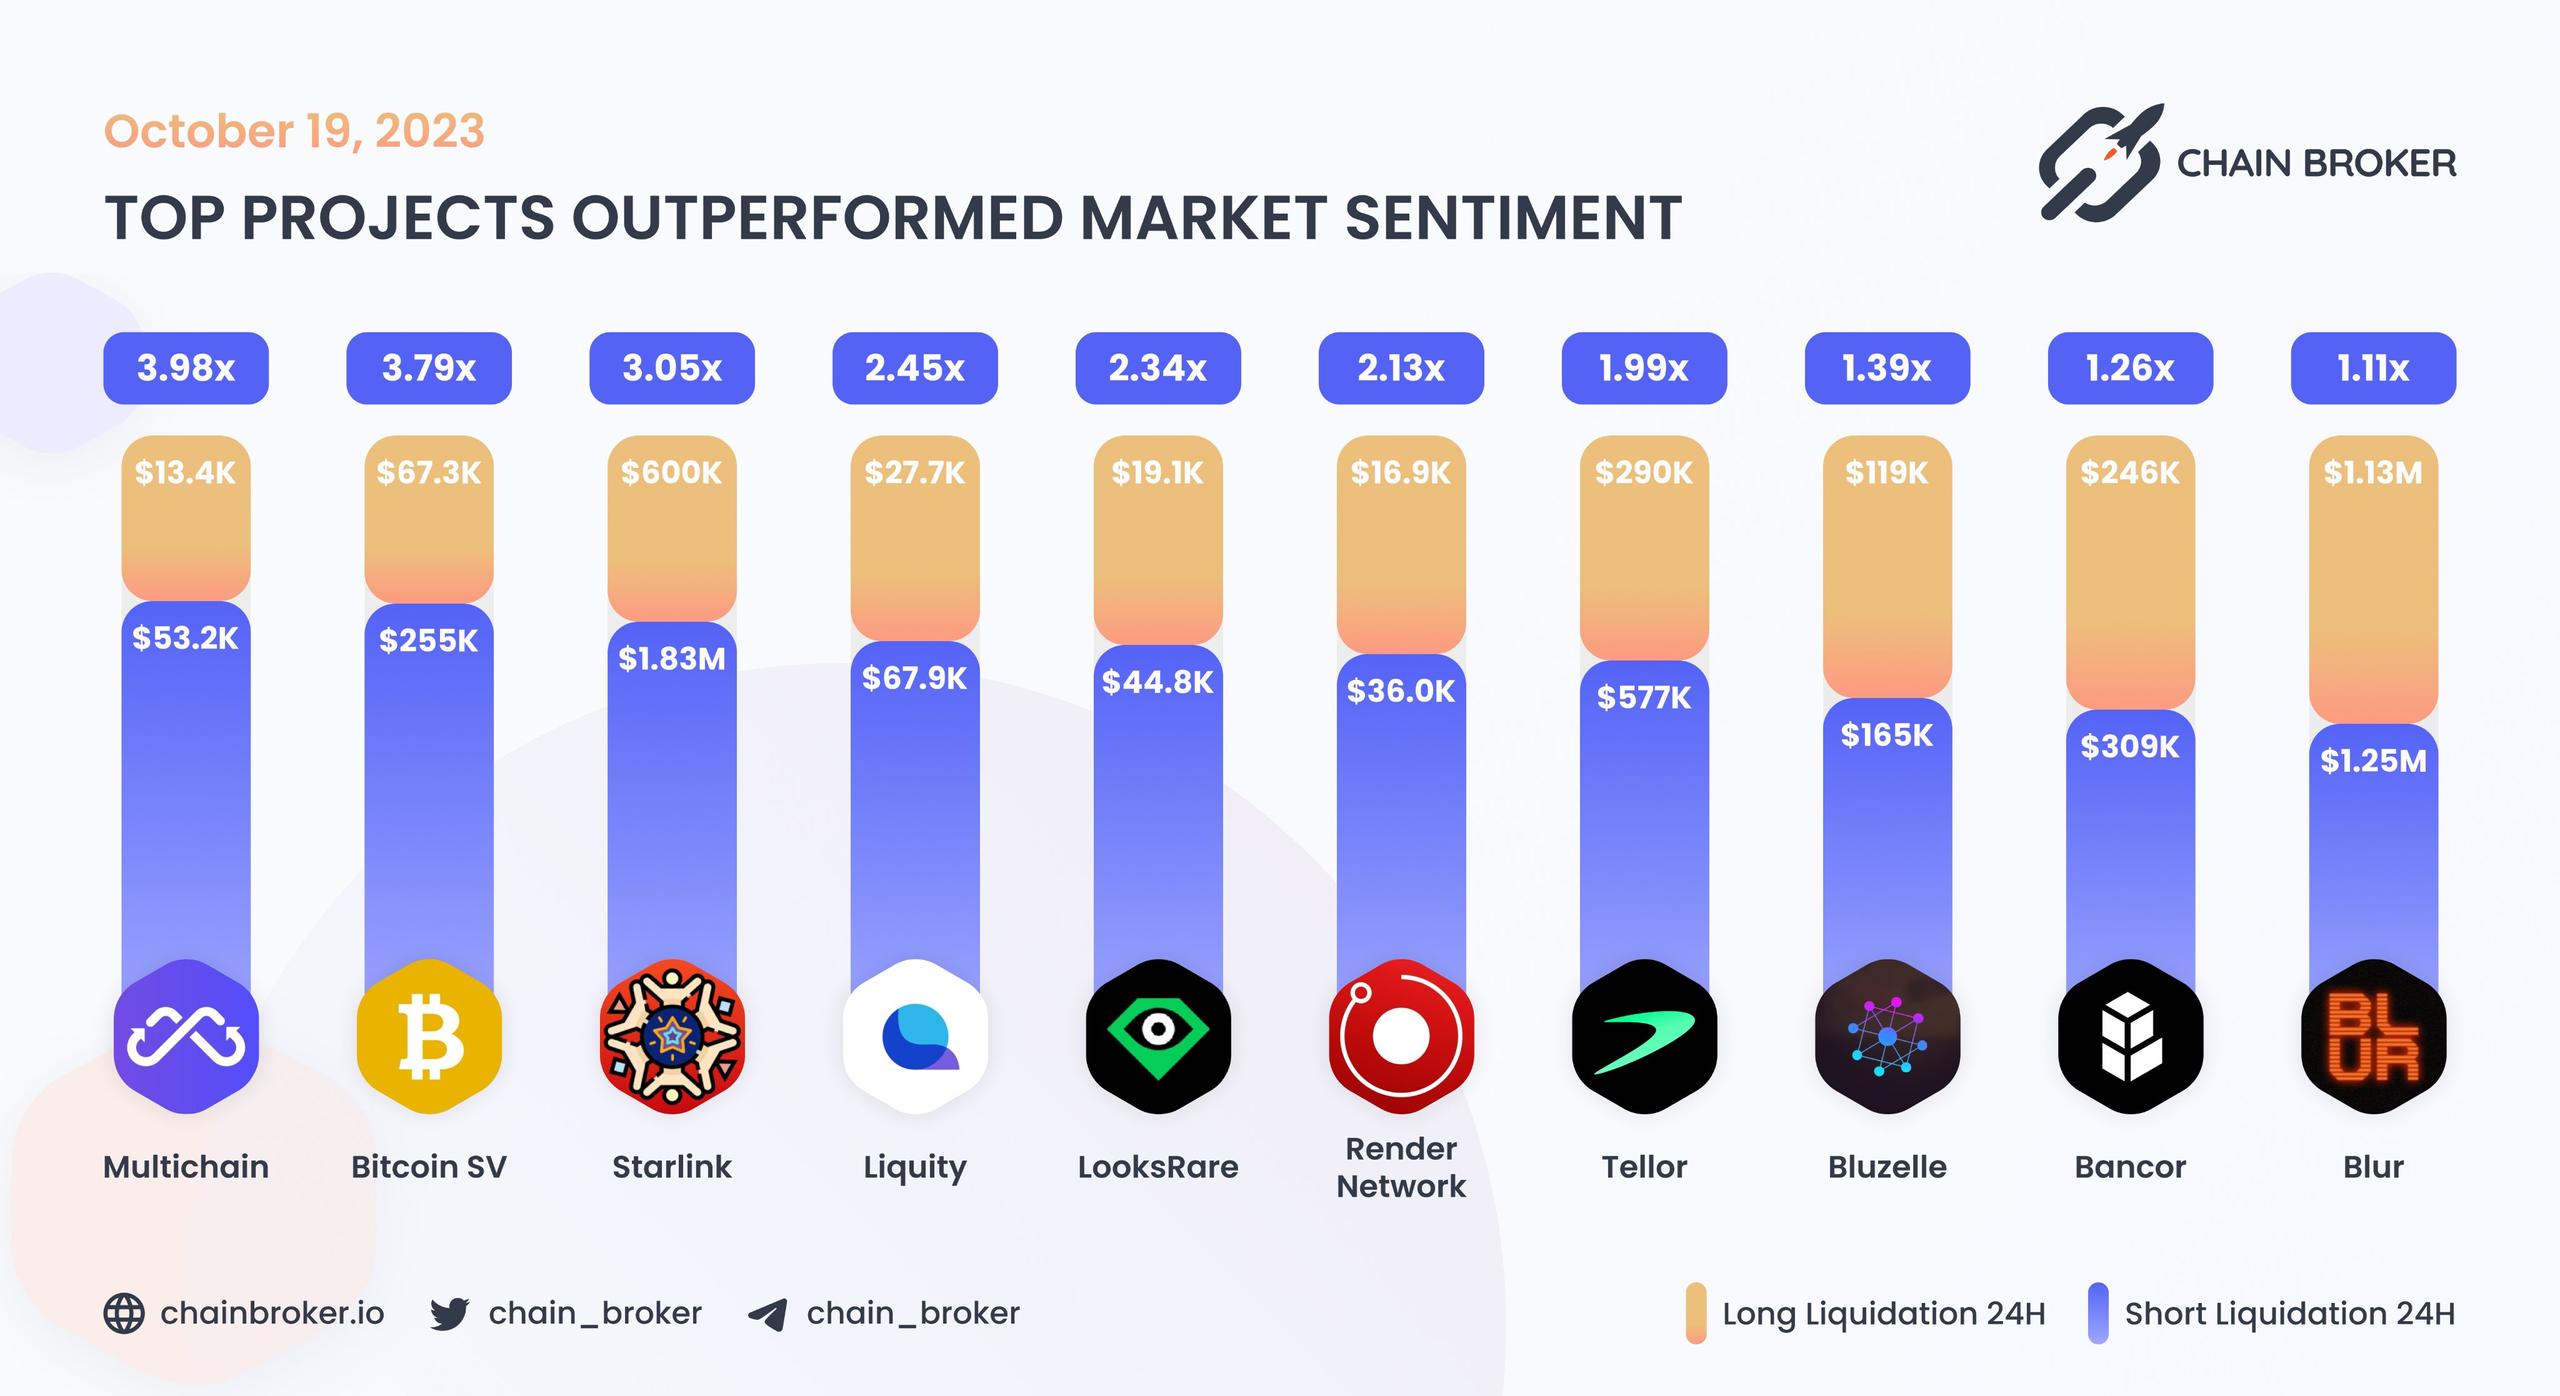 Top projects outperformed market sentiment